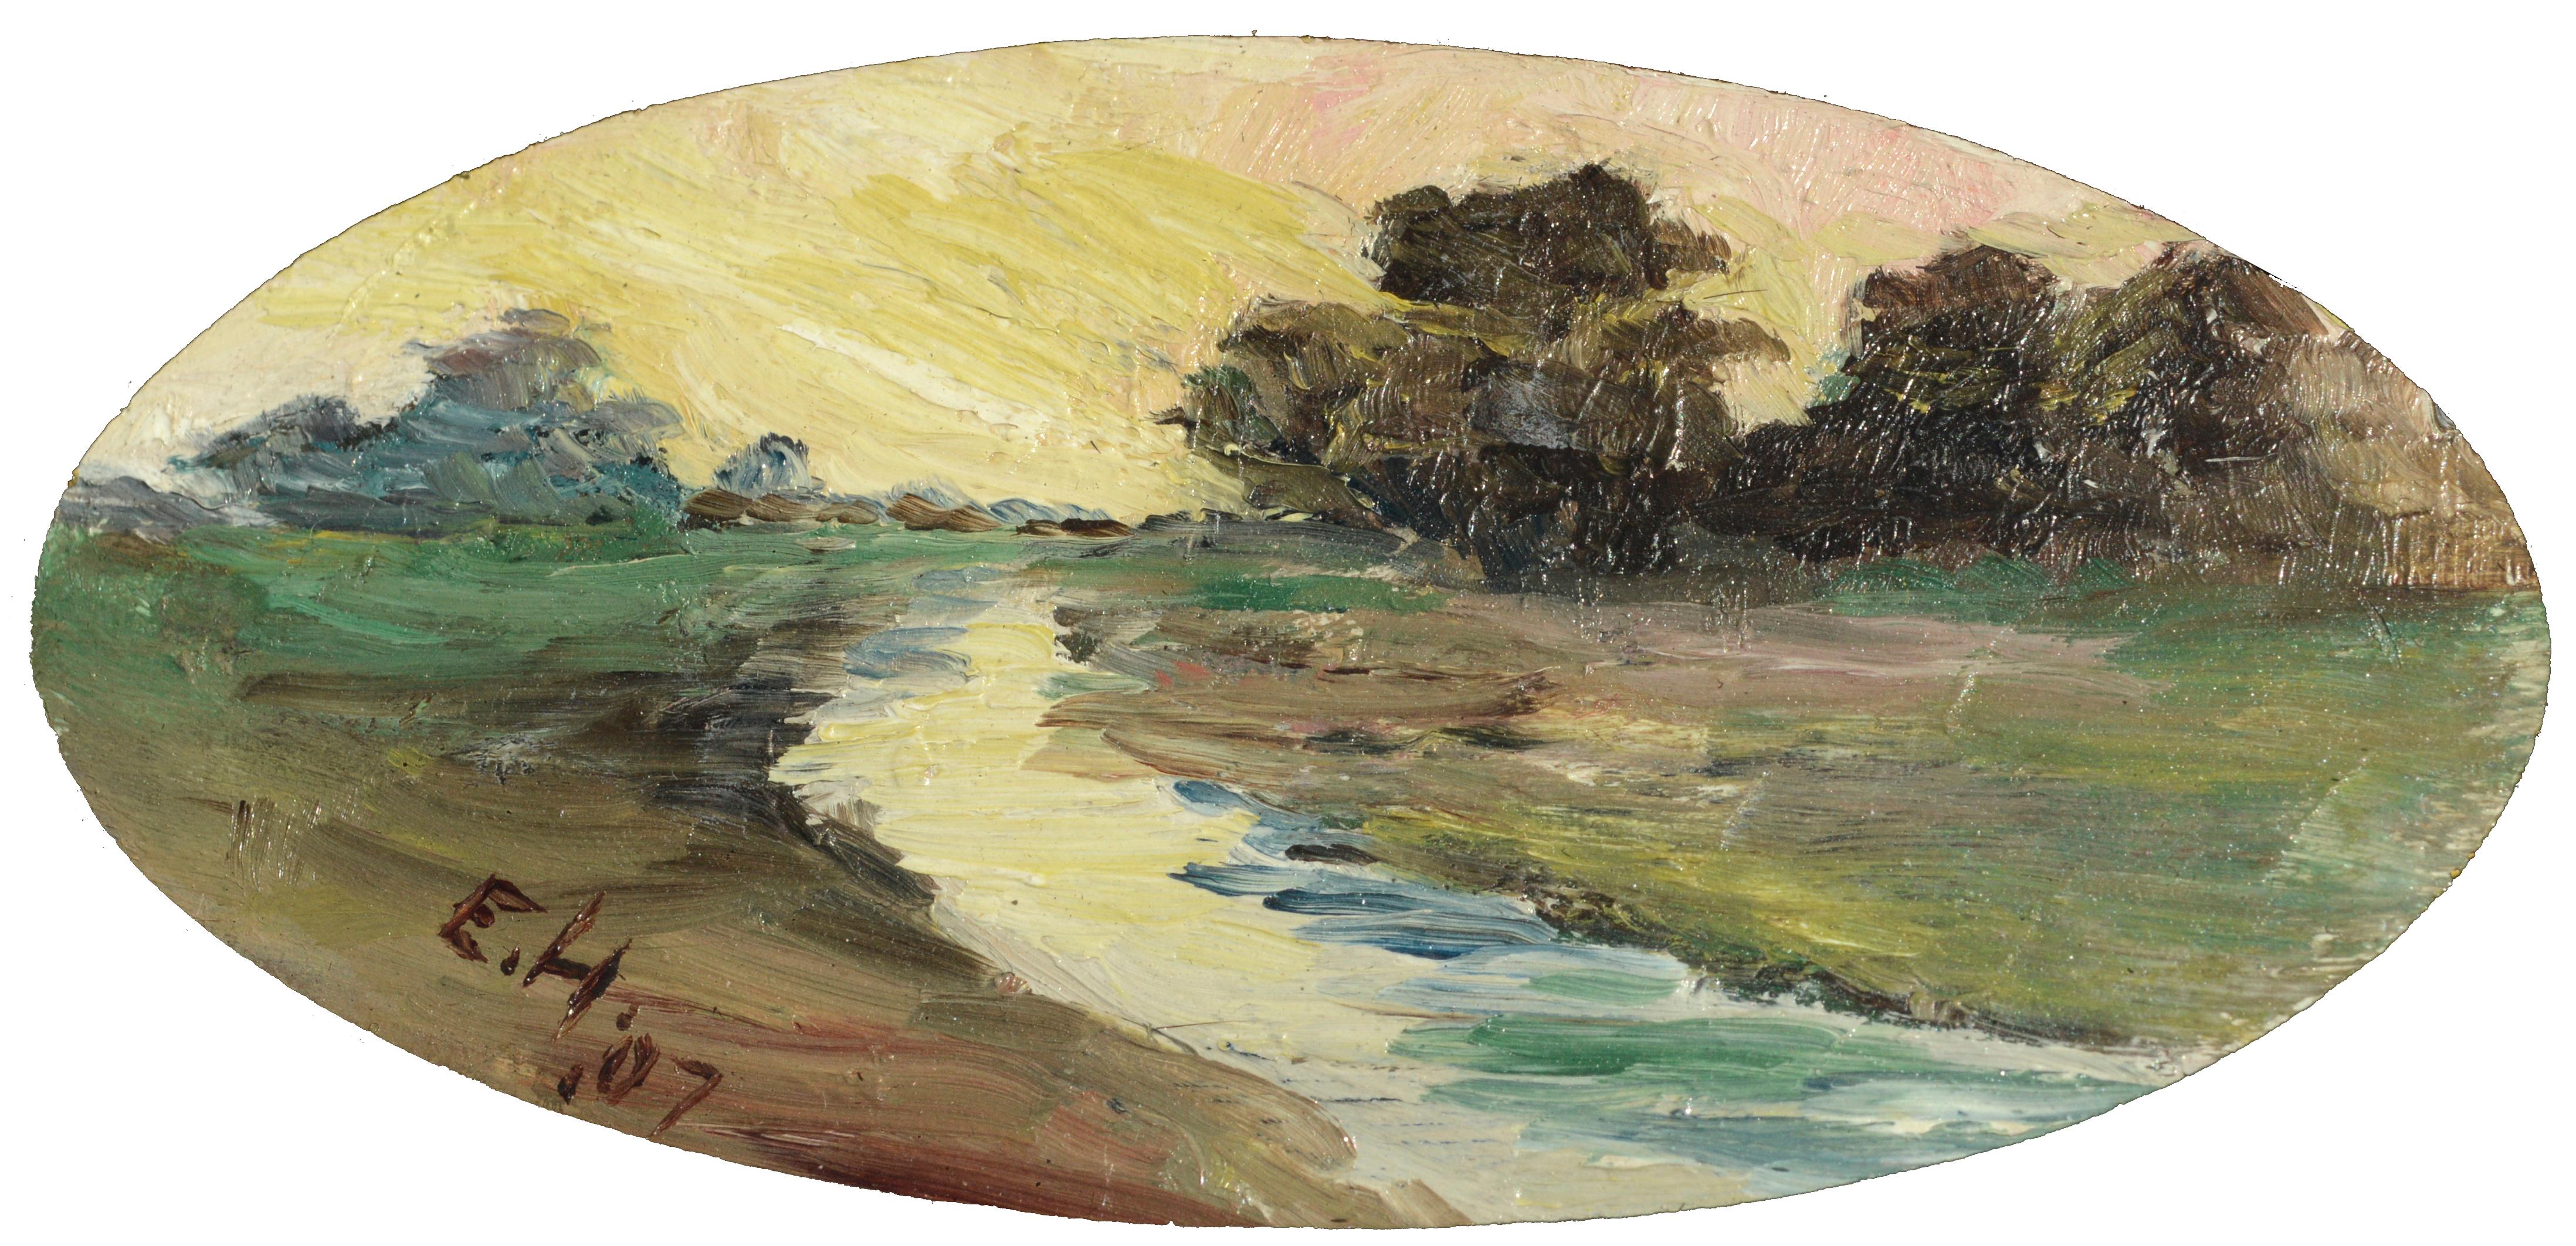 Early 20th Century Miniature Oval Landscape, San Rafael Valley Stream - Black Landscape Painting by Unknown